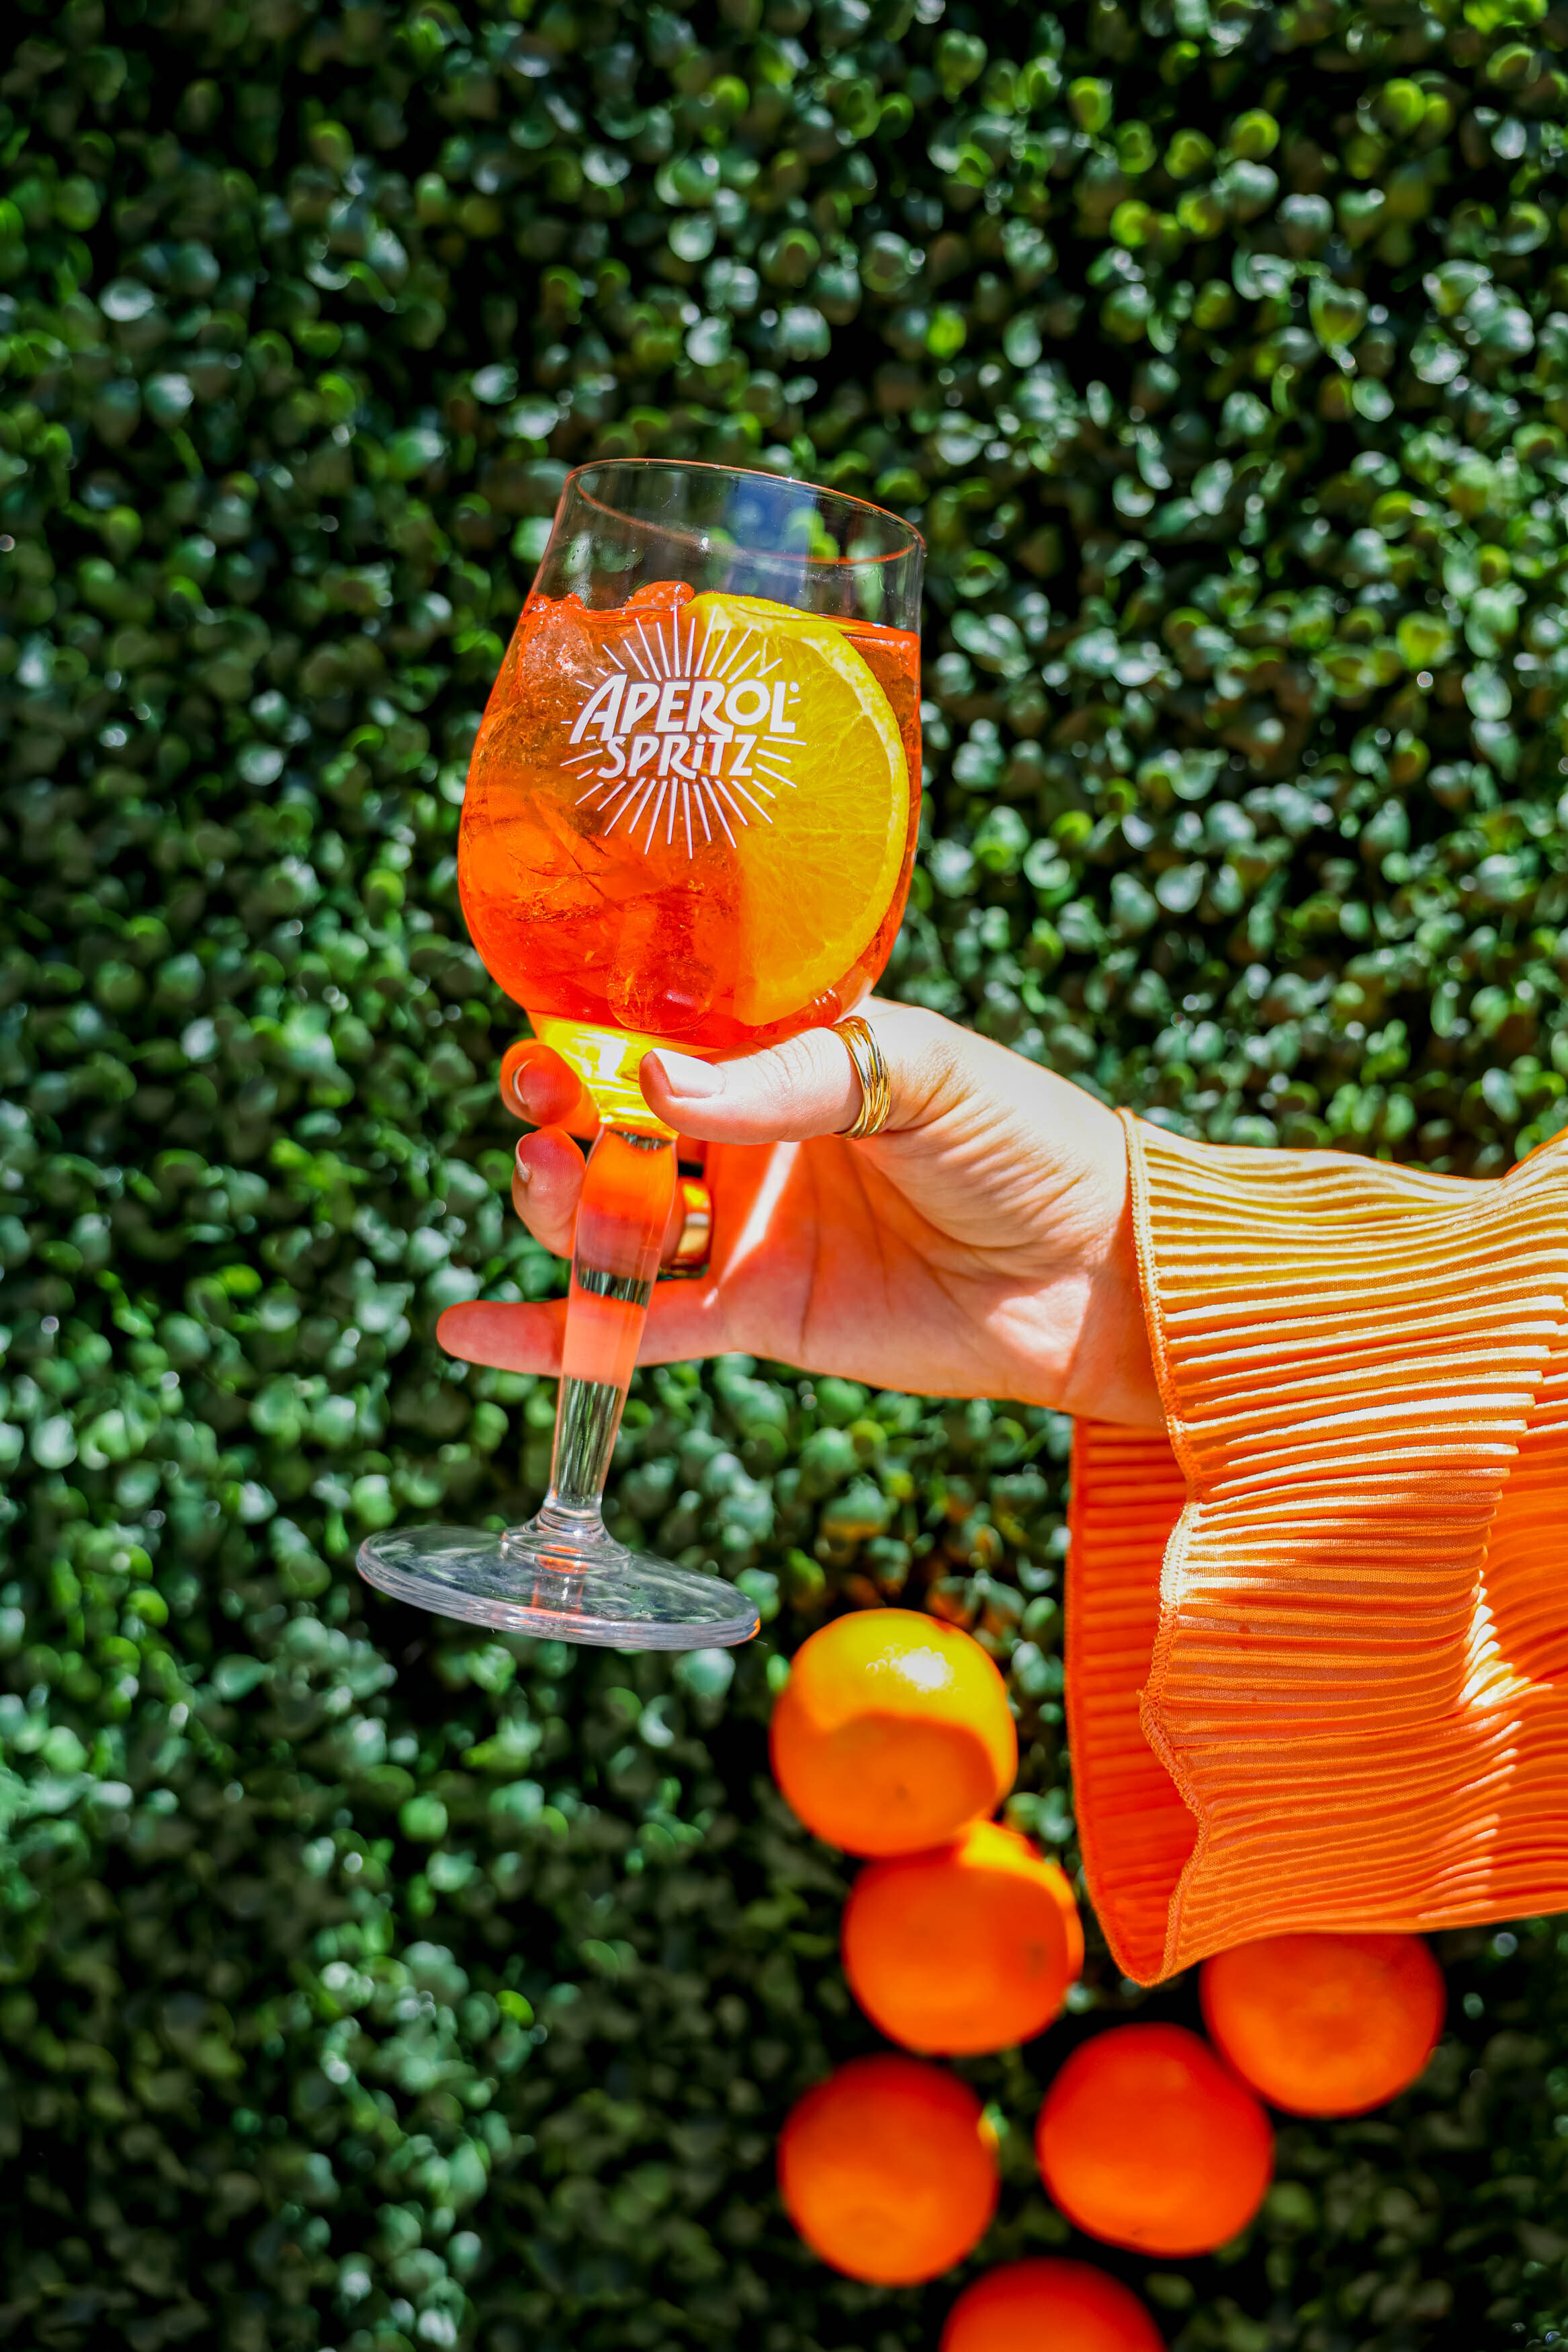 Aperol spritz in a branded glass